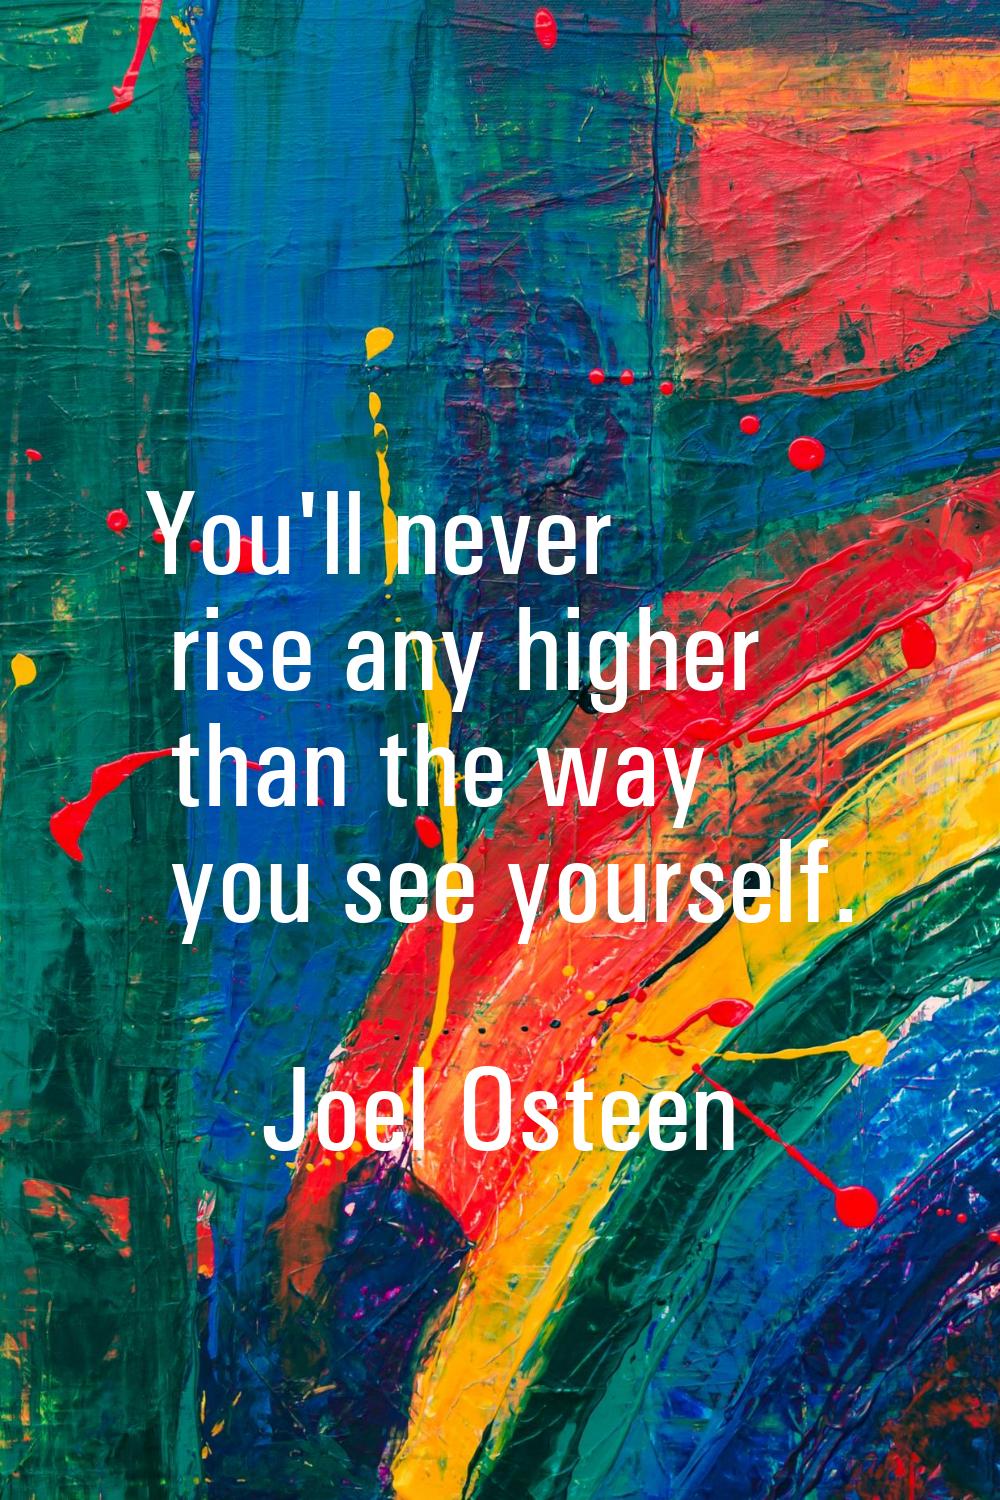 You'll never rise any higher than the way you see yourself.